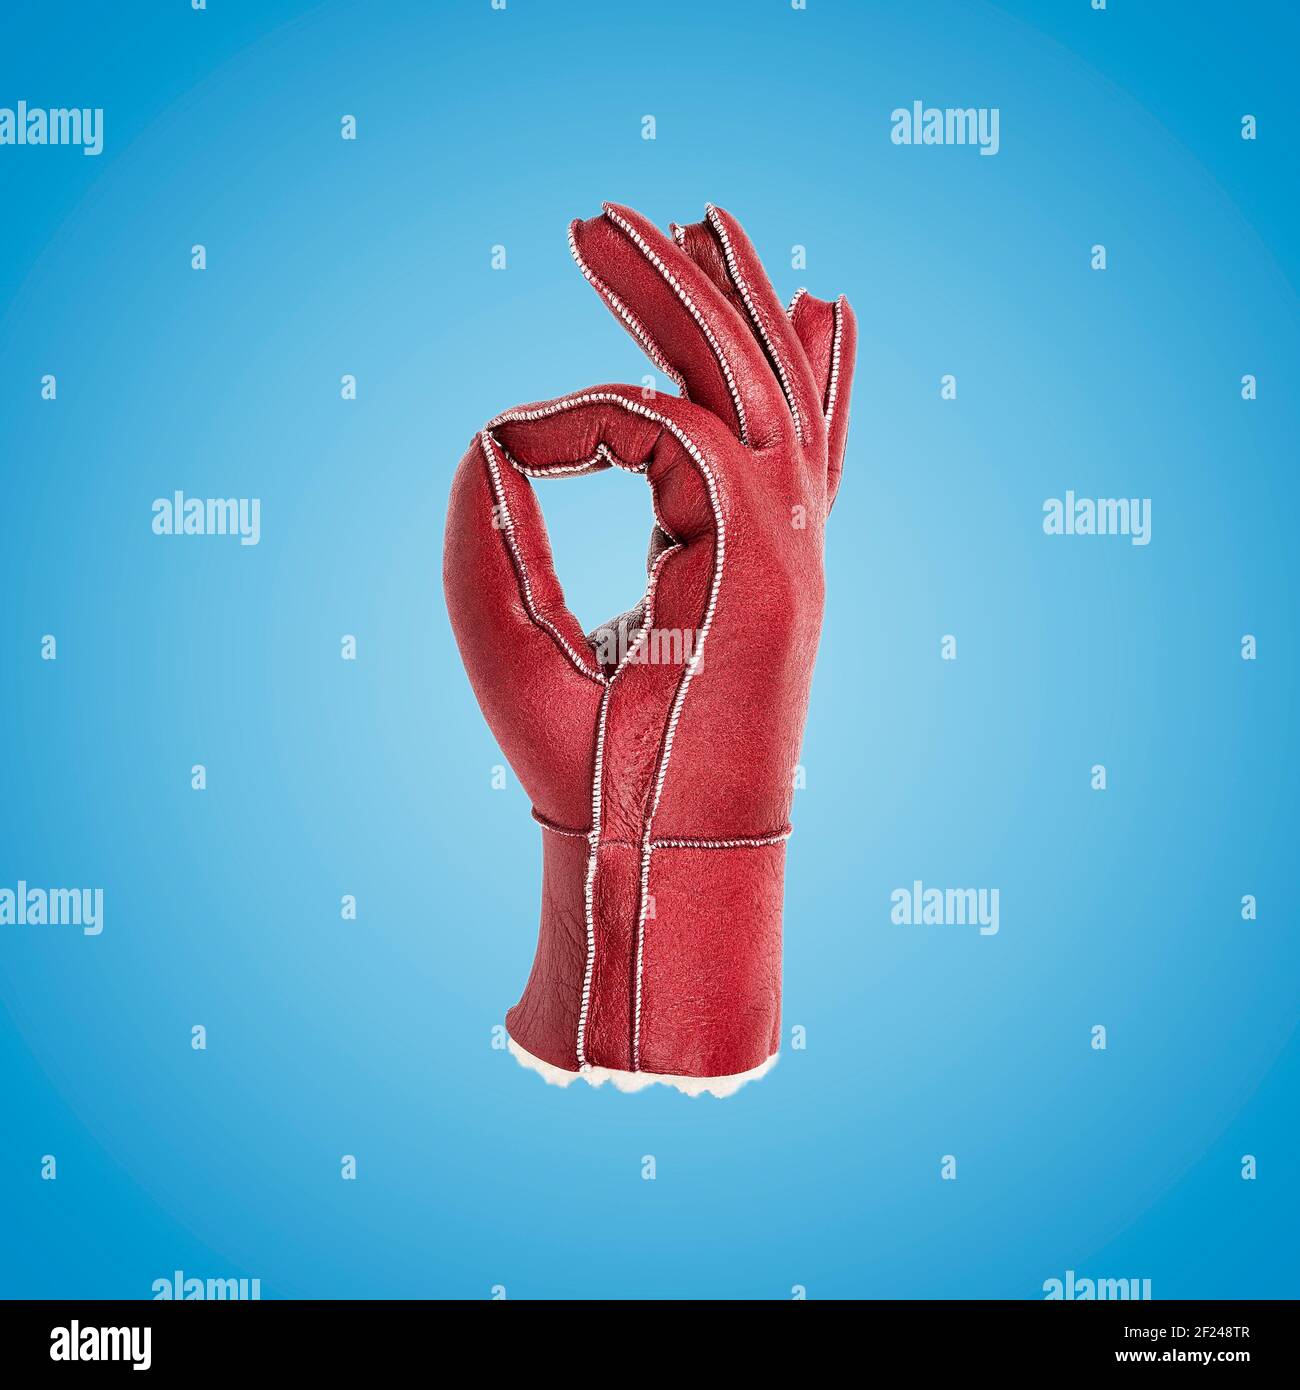 Gesturing red leather glove on blue background. Minimal art fashion concept. Stock Photo